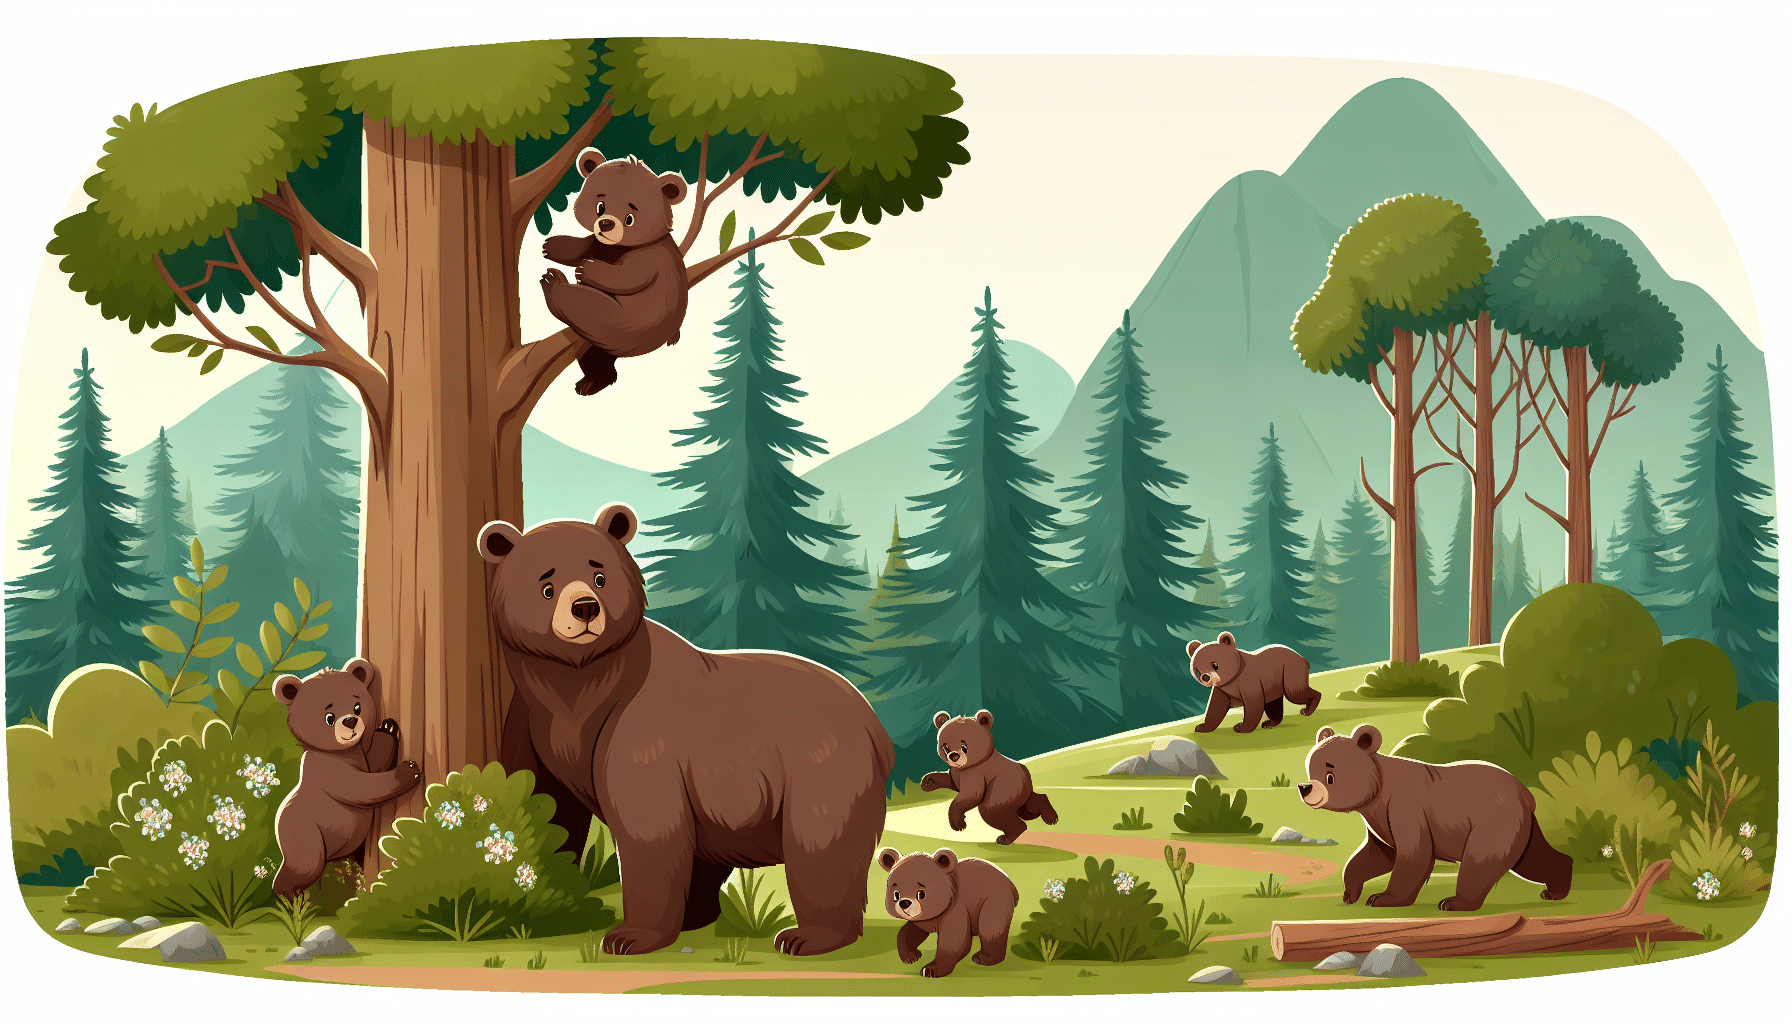 Illustration of a forest landscape with brown bears. On the left, there should be an adult brown bear with three cubs playing around her. On the right, a few cubs should be climbing a tree. The whole scene should be set in a serene forest environment, with no human presence, brands, or any text.